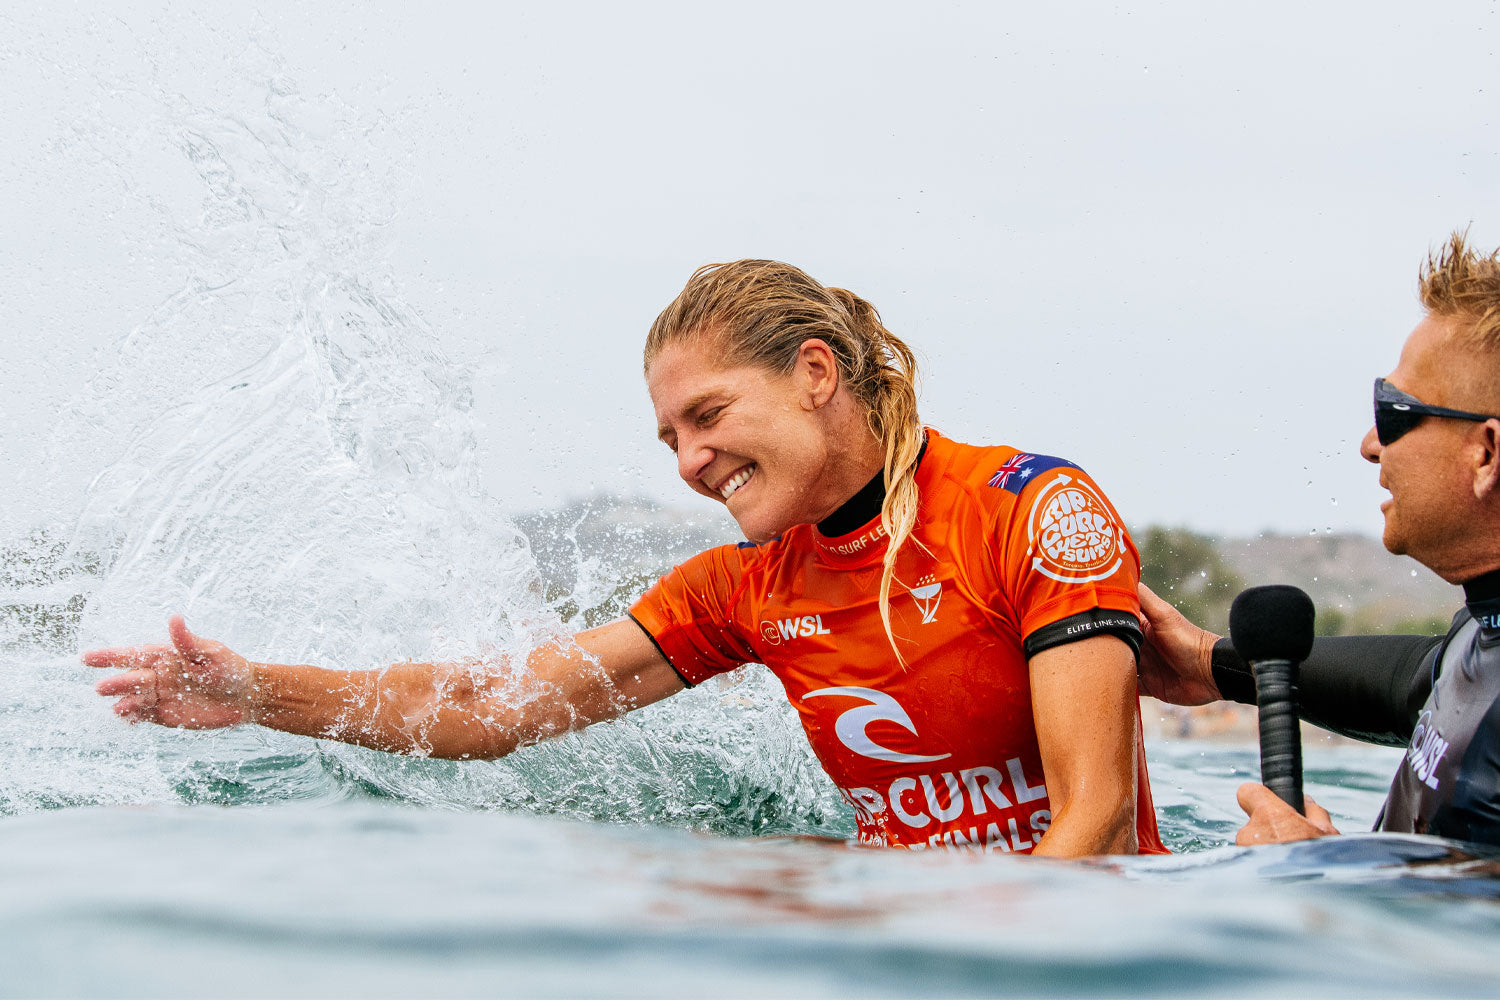 Stephanie Gilmore Makes History Winning an 8th World Title At Trestles